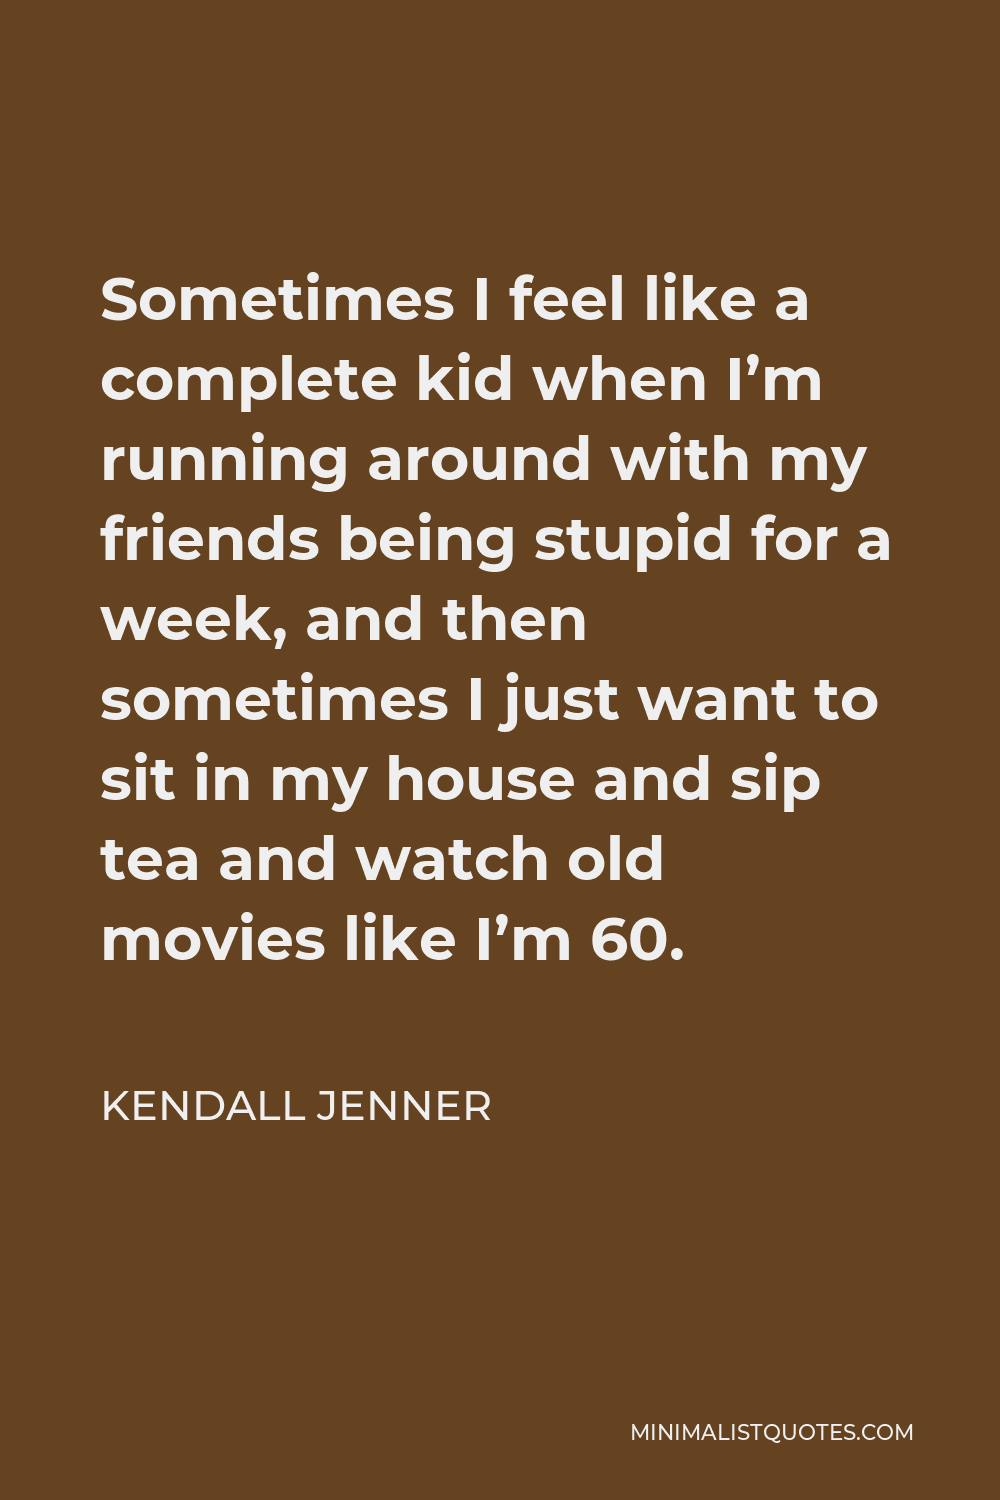 Kendall Jenner Quote - Sometimes I feel like a complete kid when I’m running around with my friends being stupid for a week, and then sometimes I just want to sit in my house and sip tea and watch old movies like I’m 60.